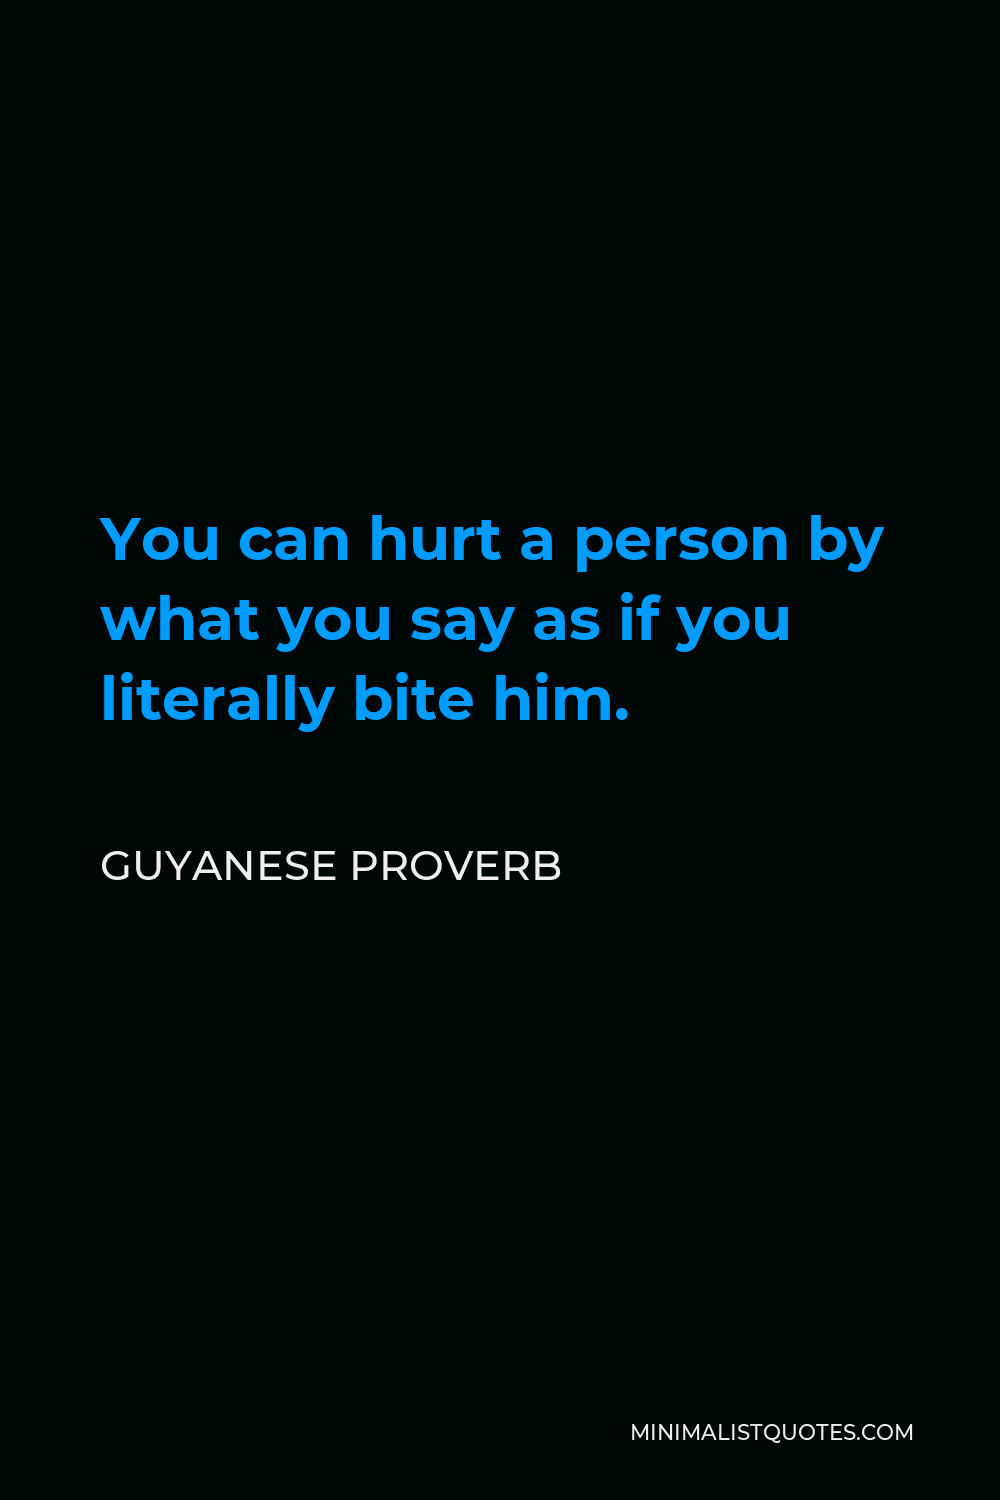 Guyanese Proverb Quote - You can hurt a person by what you say as if you literally bite him.